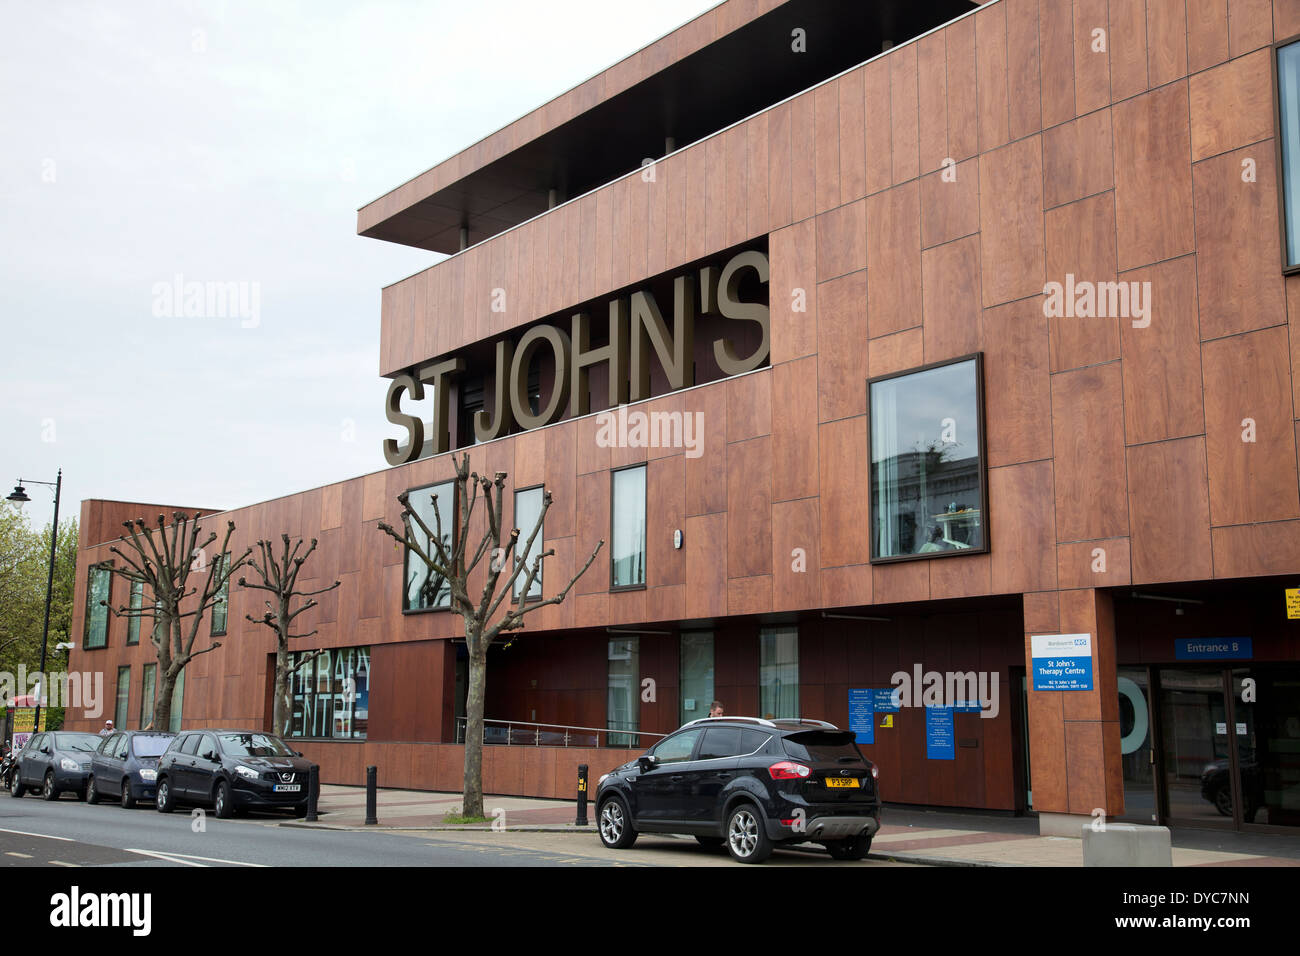 St Johns Therapy centre on St John's Hill in SW11 - London UK Stock Photo